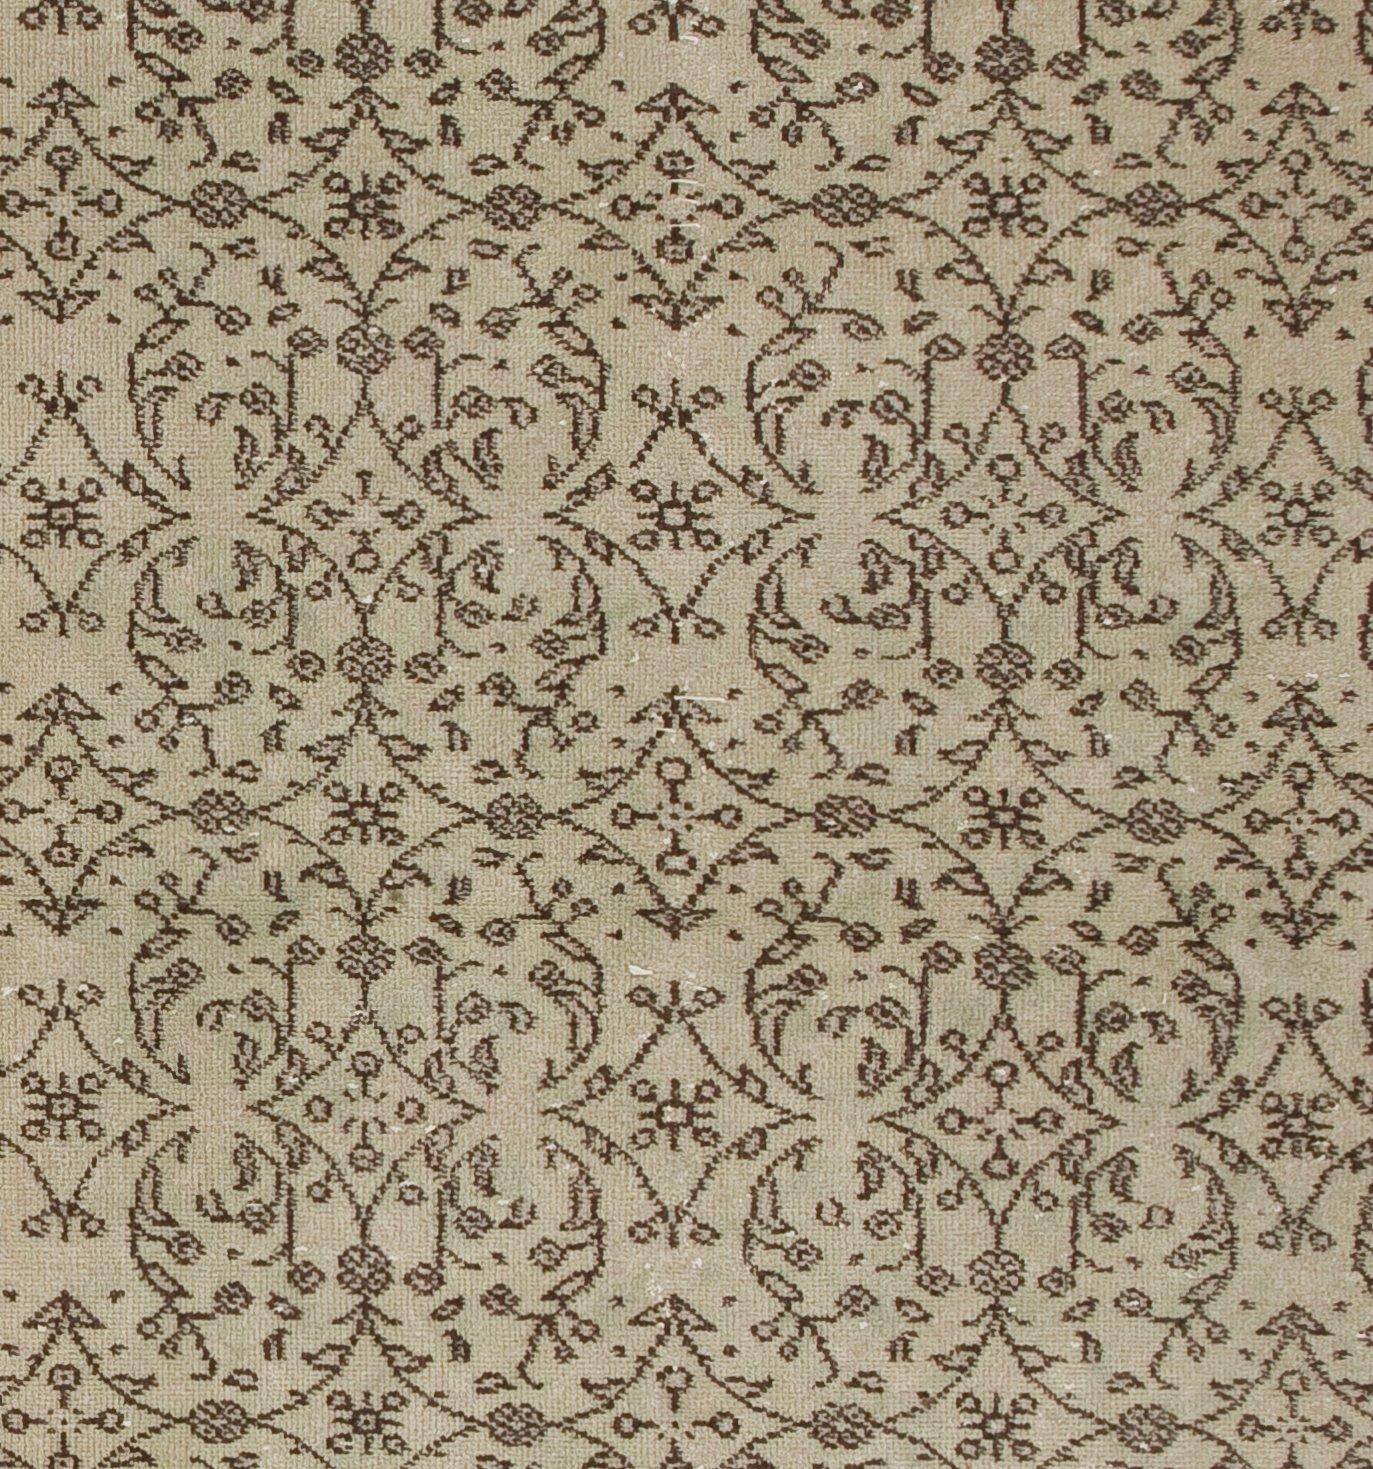 Hand-Knotted Vintage Floral Patterned Turkish Rug in Neutral Colors In Good Condition For Sale In Philadelphia, PA